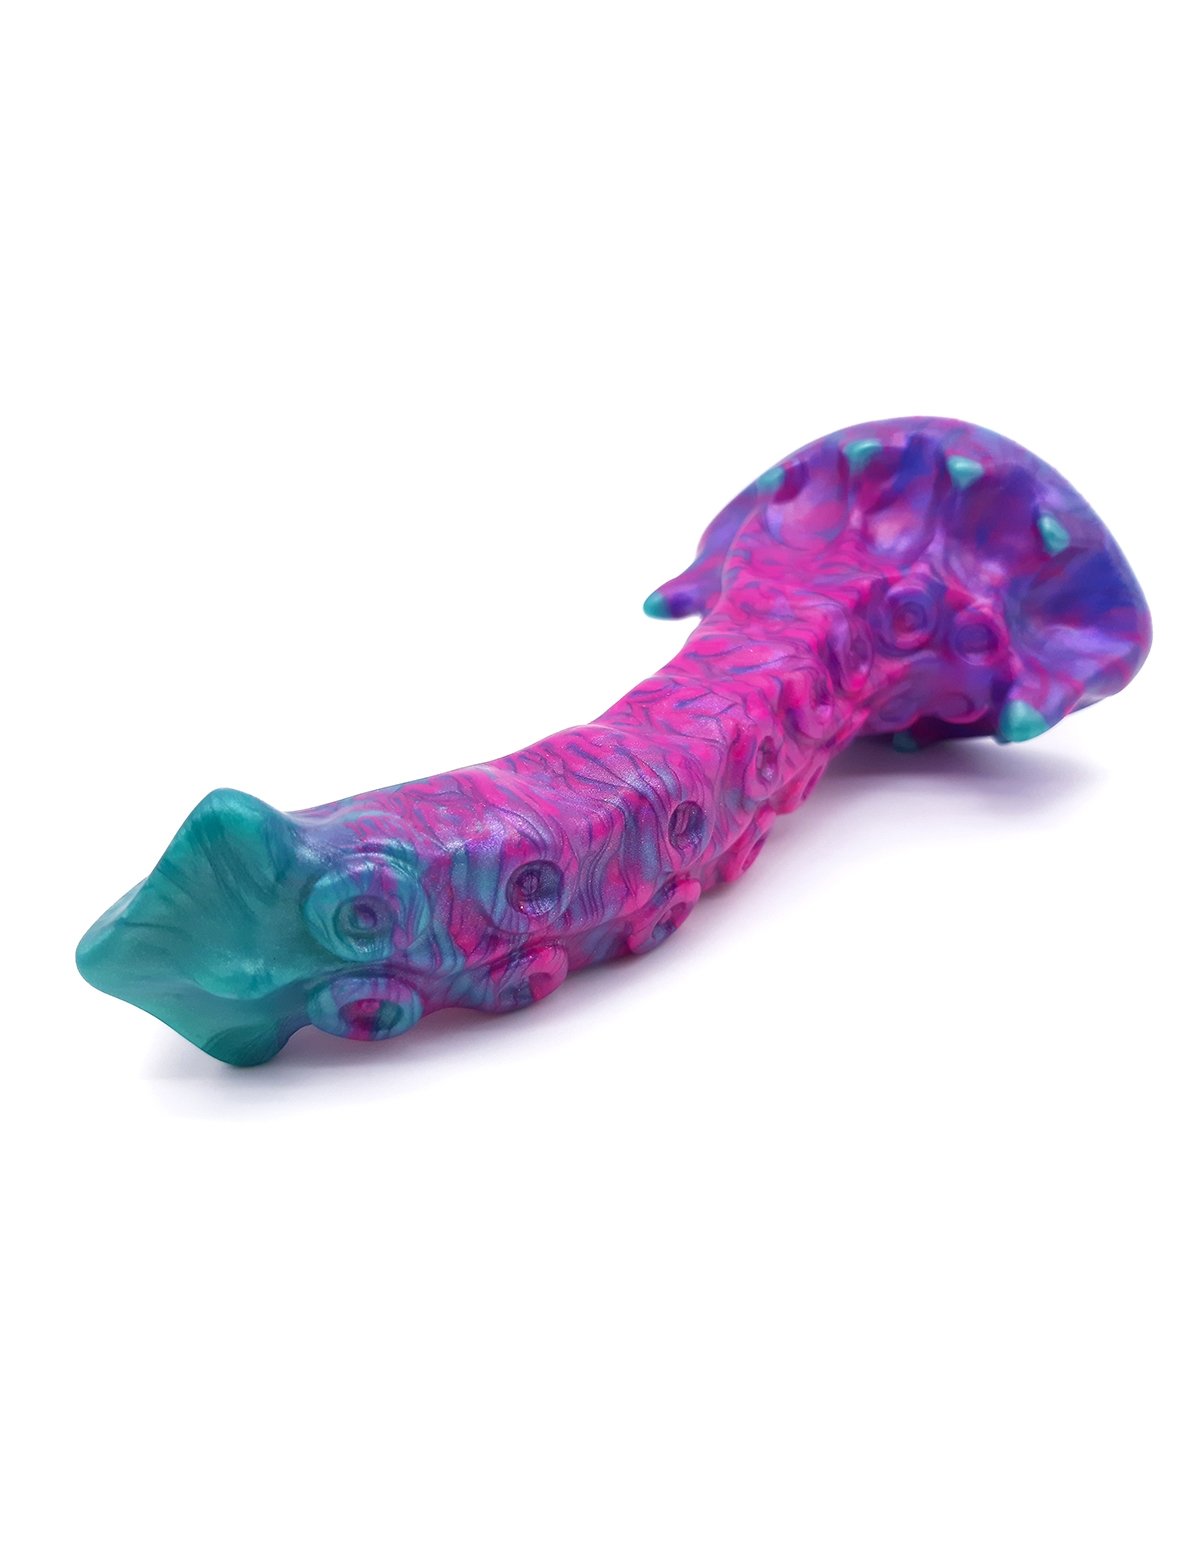 alternate image for The Xenuphora Alien Tentacle